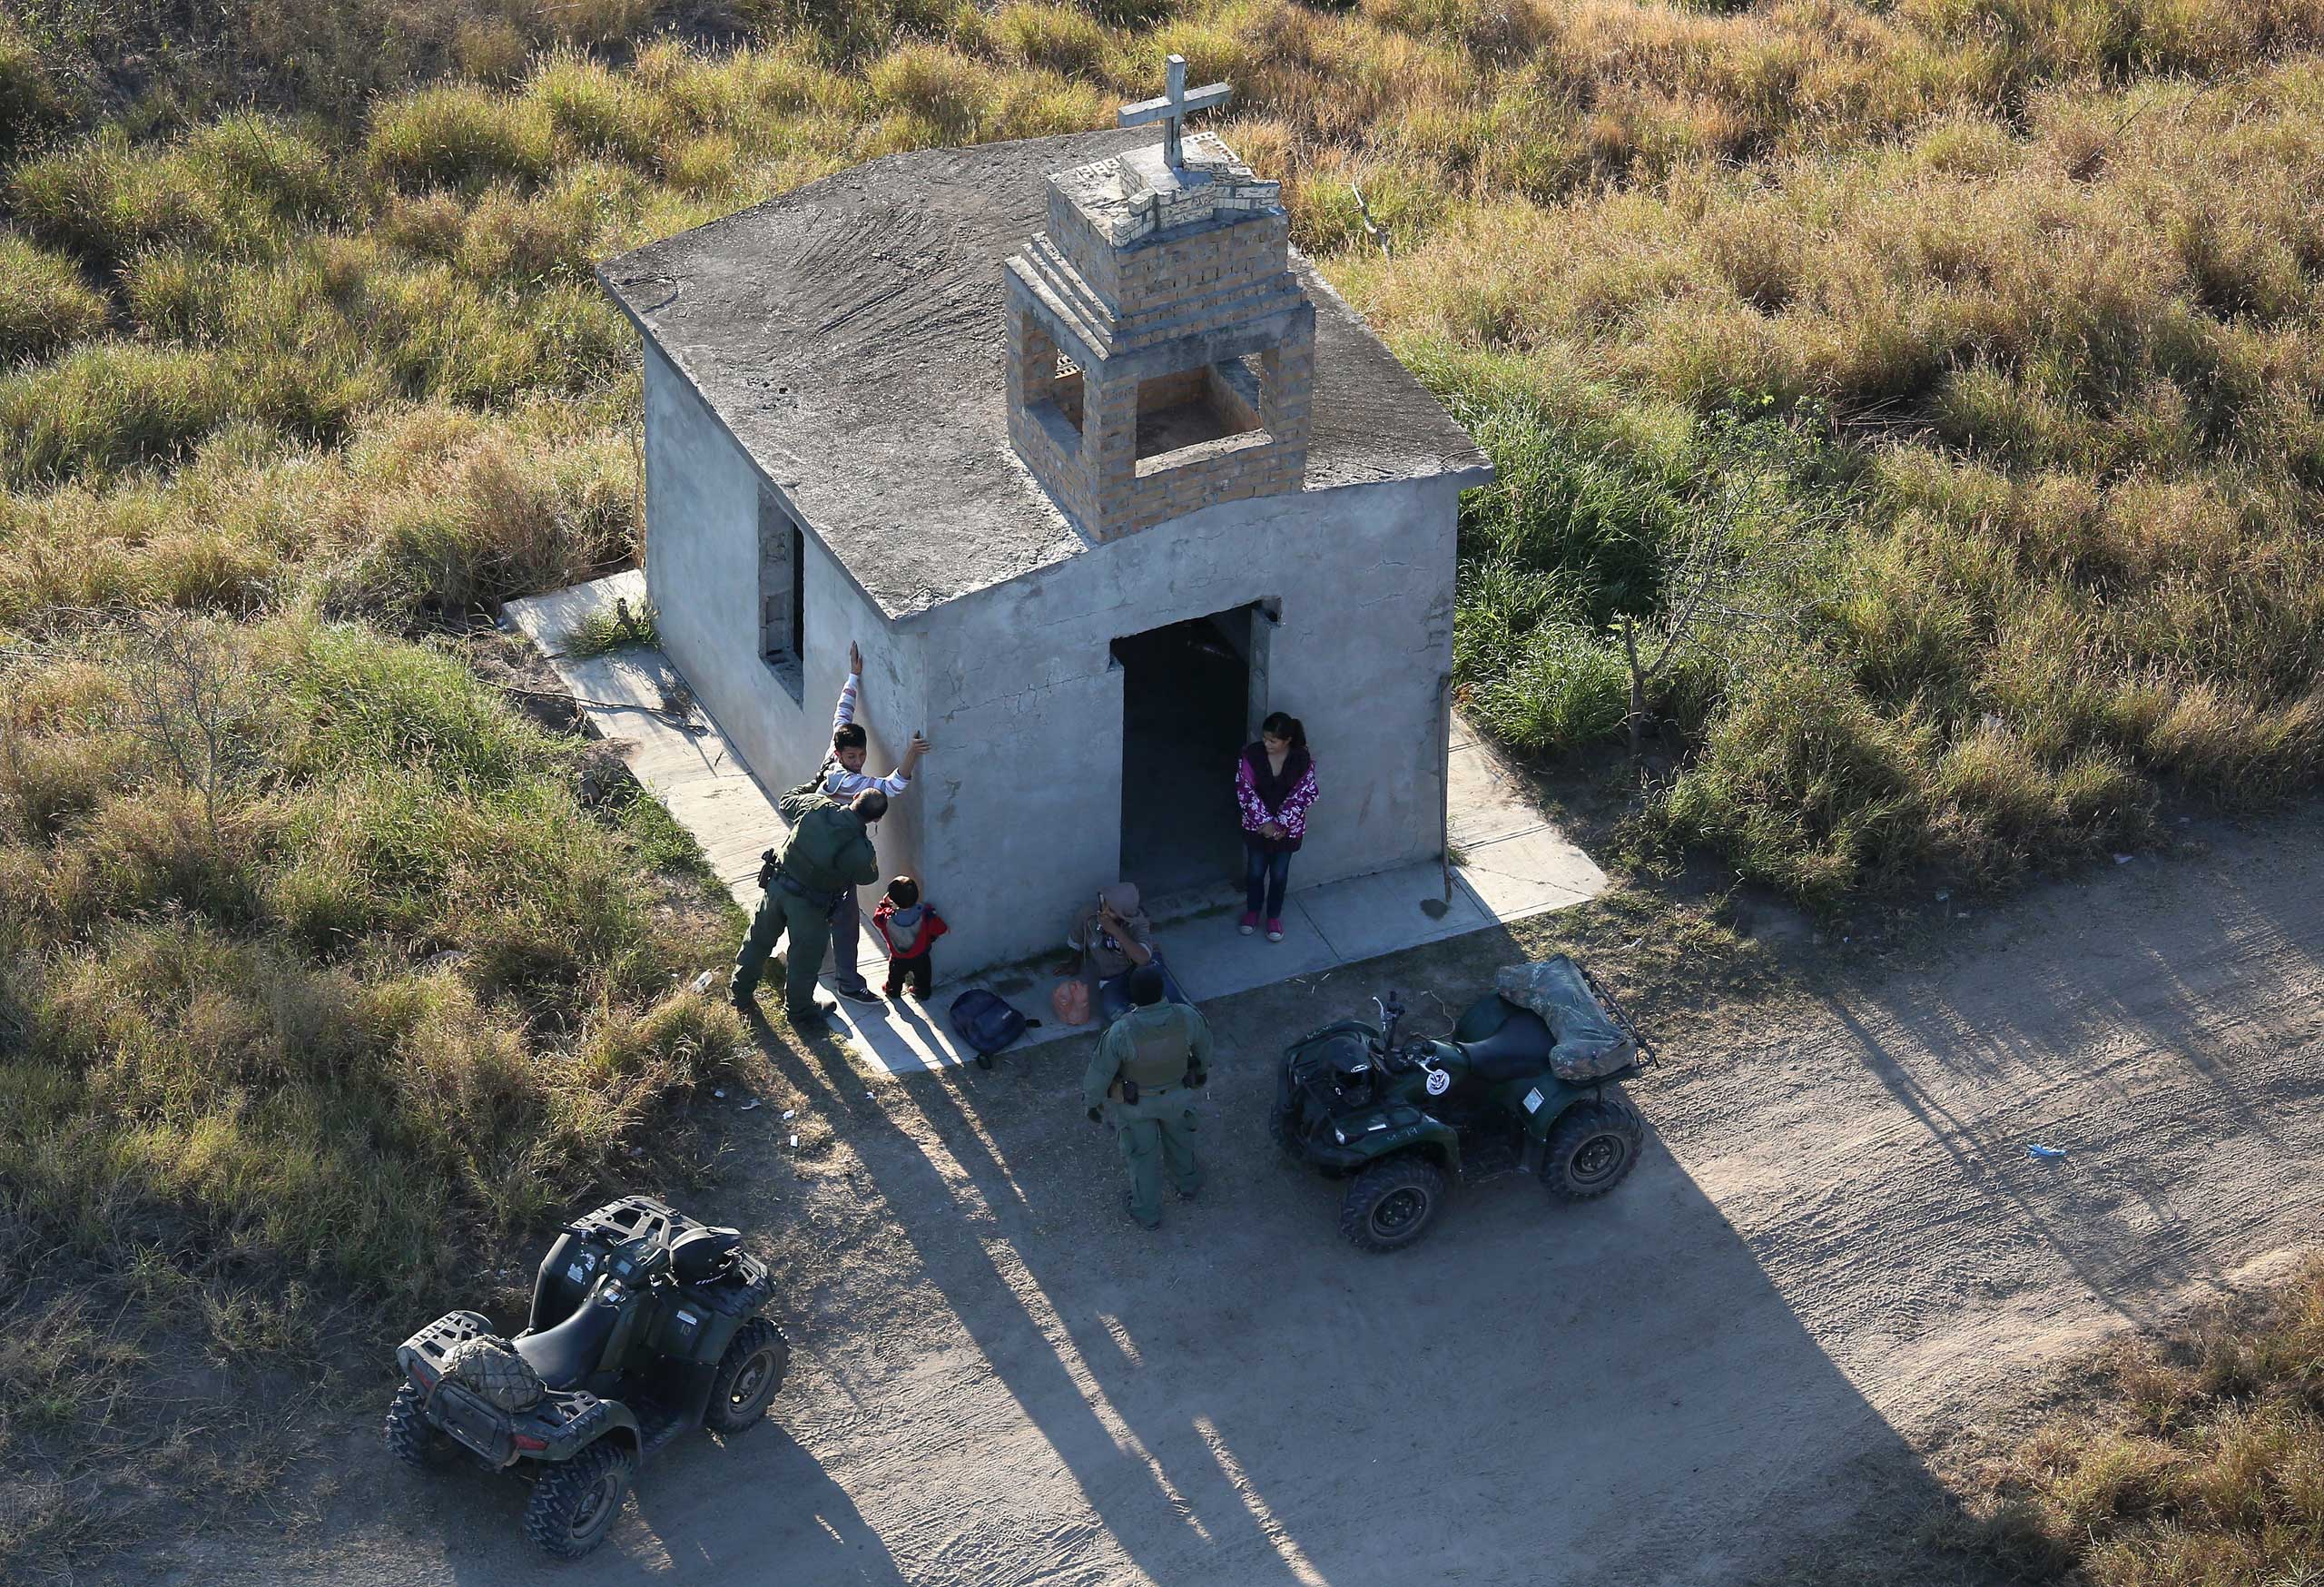 U.S. Border Patrol agents search a migrant family after they crossed the U.S.-Mexico border near Rio Grande City, Texas, on Dec. 9, 2015. (John Moore—Getty Images)